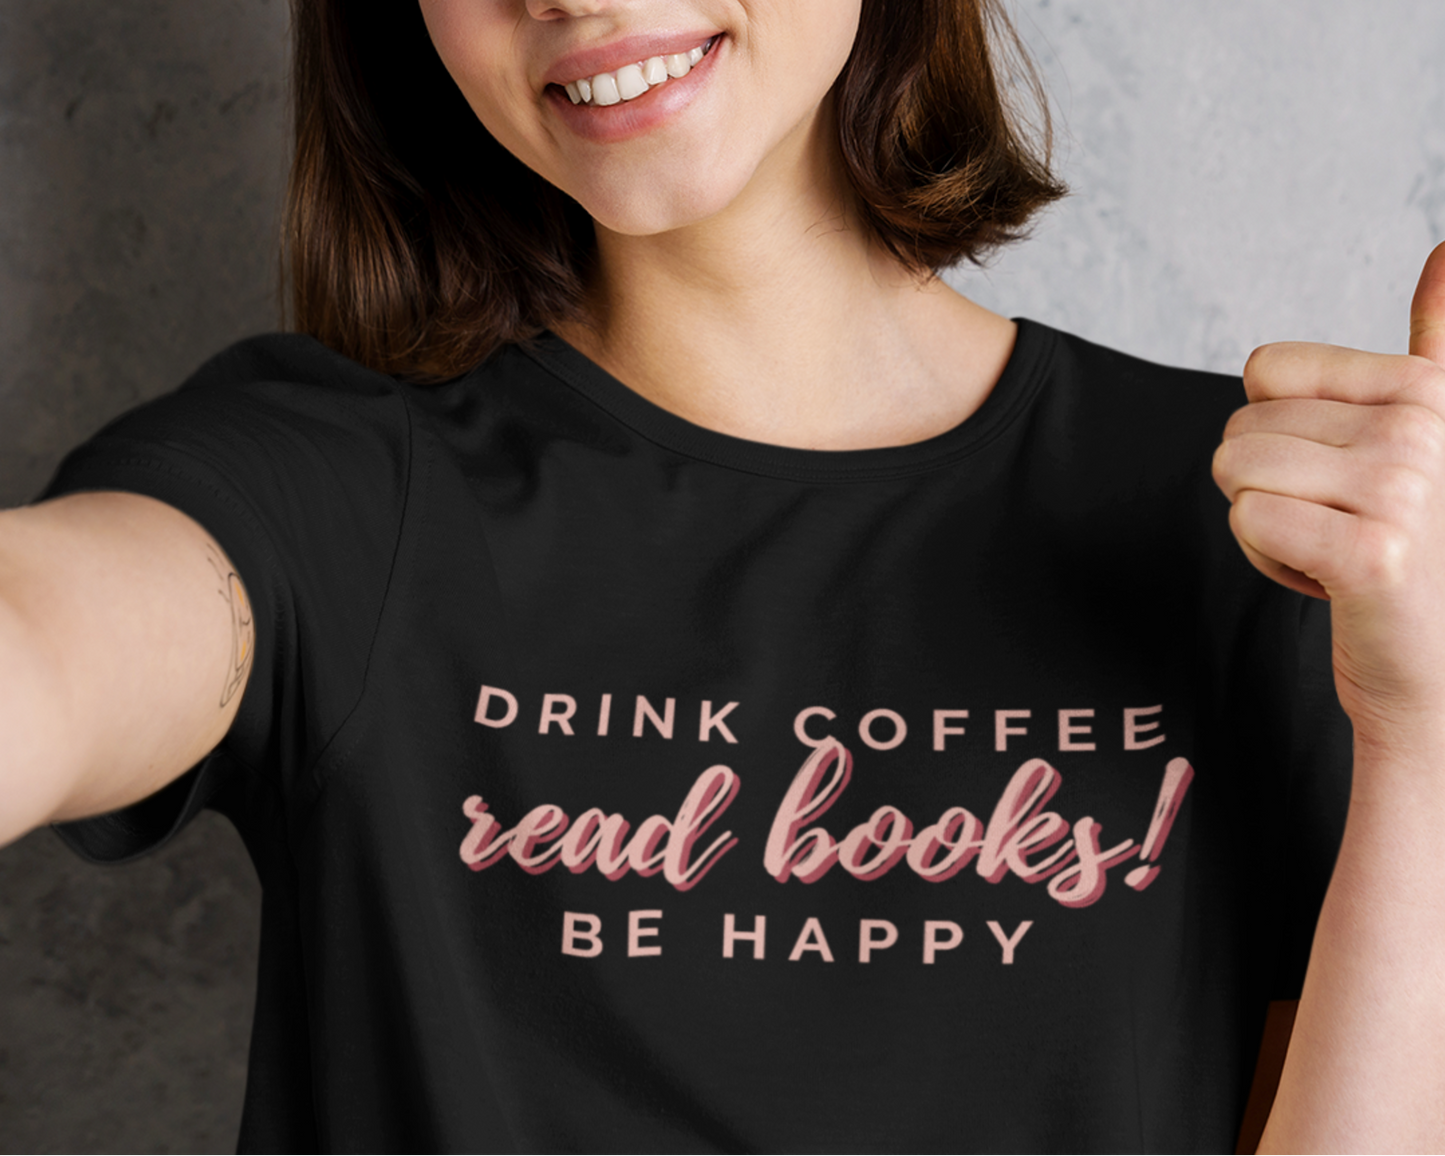 Drink Coffee, Read Books, Be Happy - Bookish T-Shirt